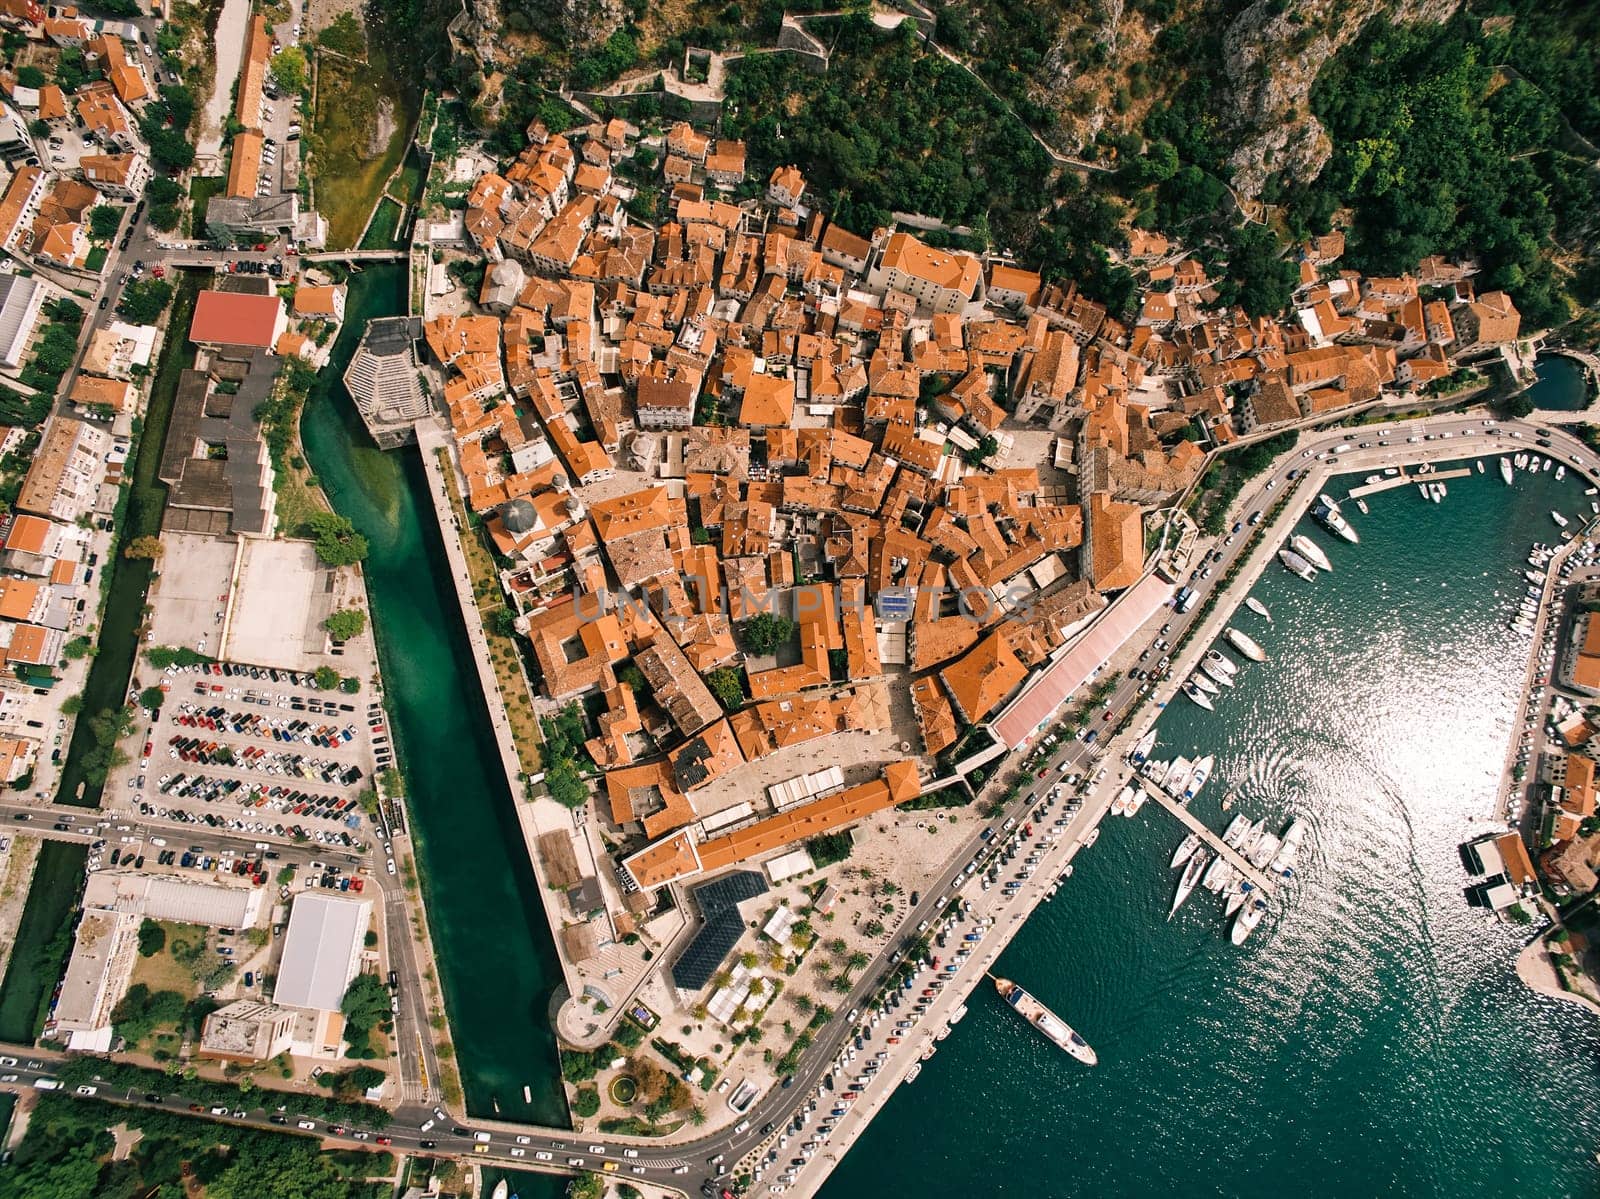 Pier with moored boats off the coast of the town of Kotor with the red roofs of ancient buildings. Montenegro. Drone. High quality photo